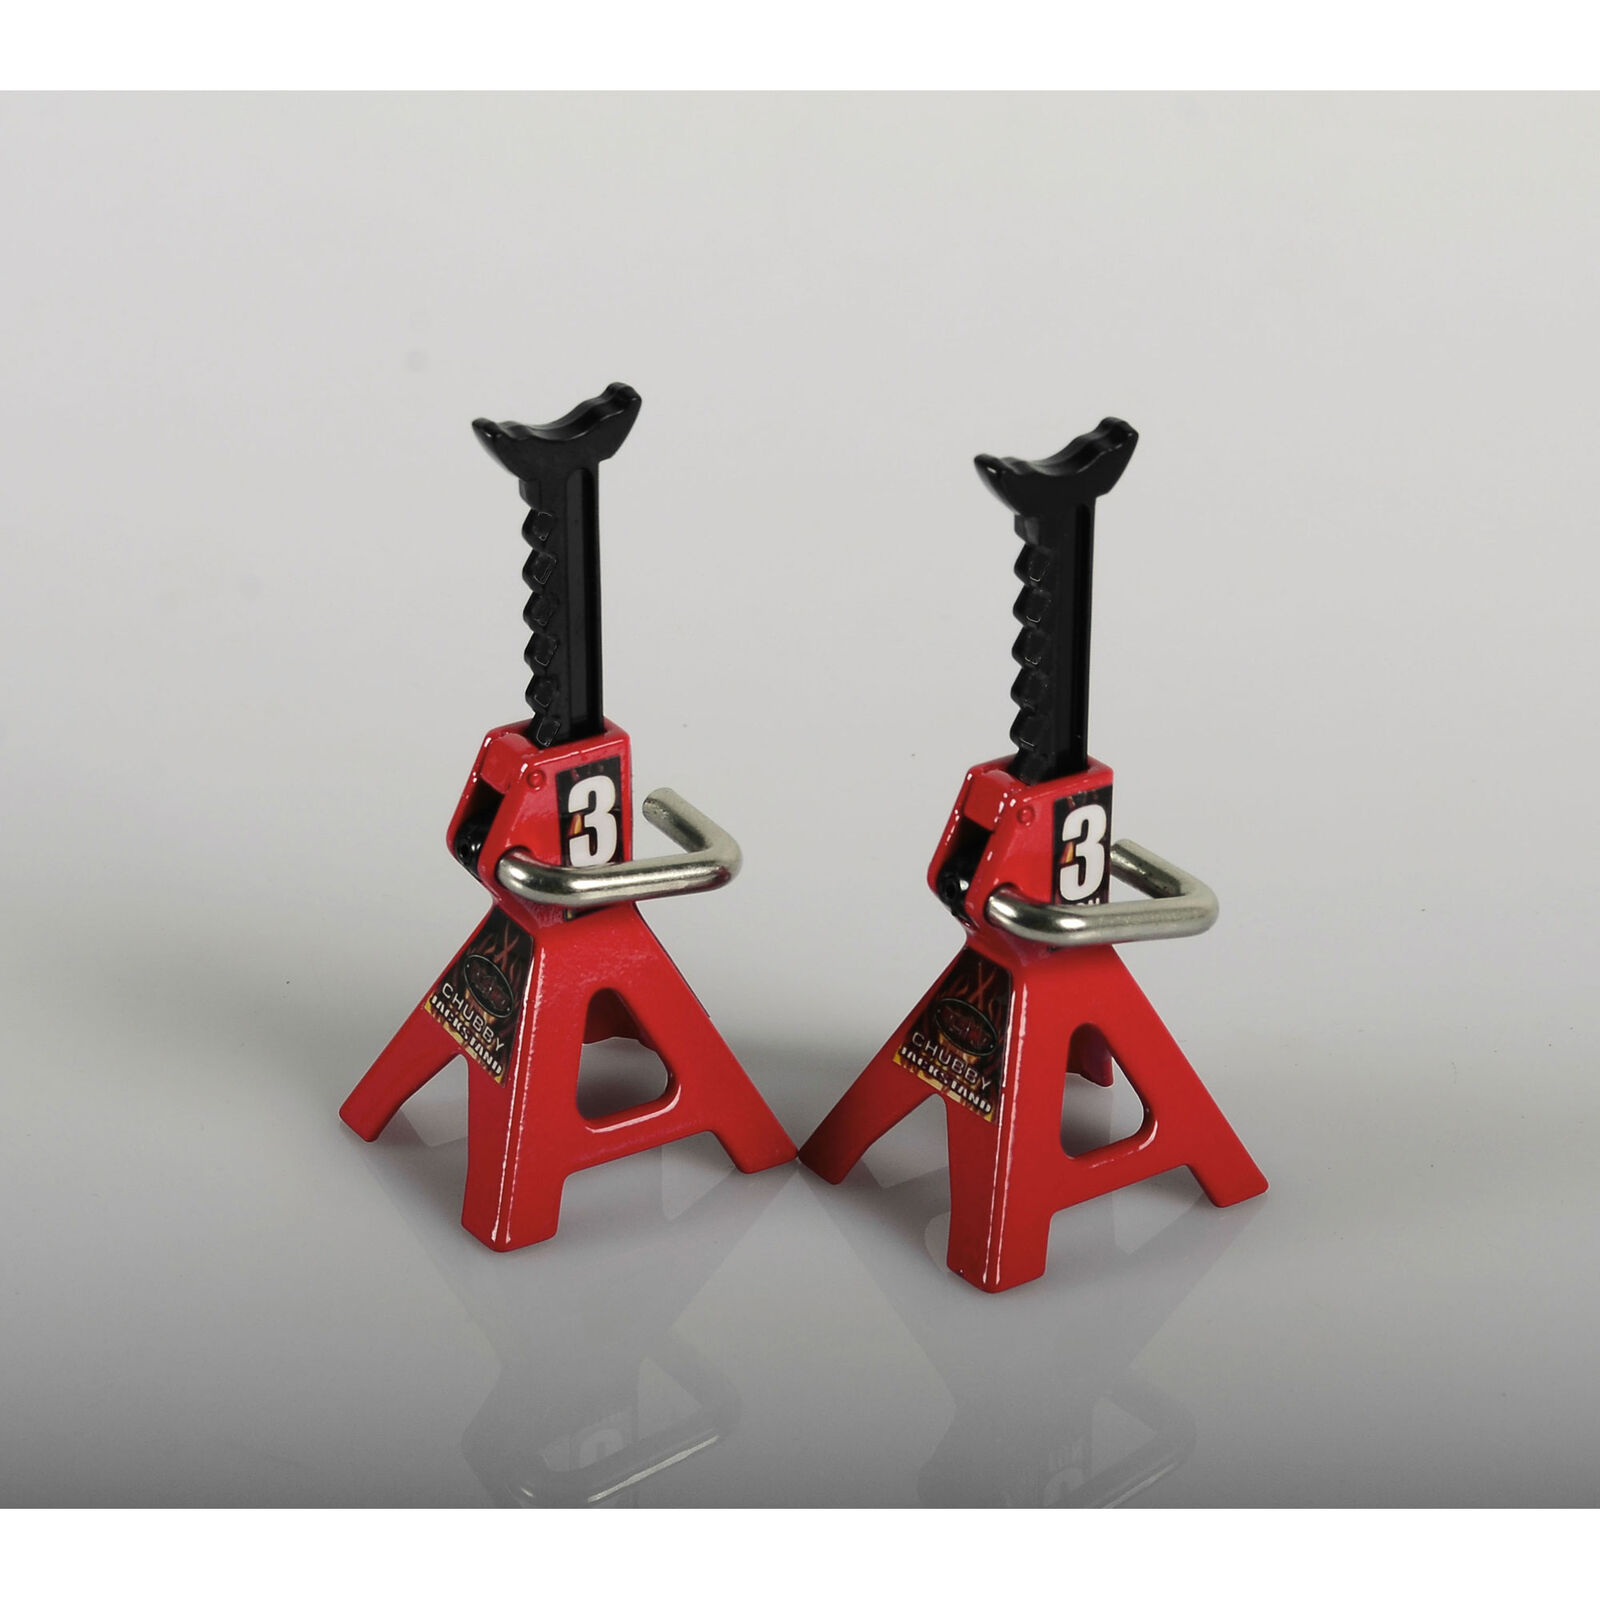 Chubby Mini 3 TON Scale Looking R/C Jack Stands